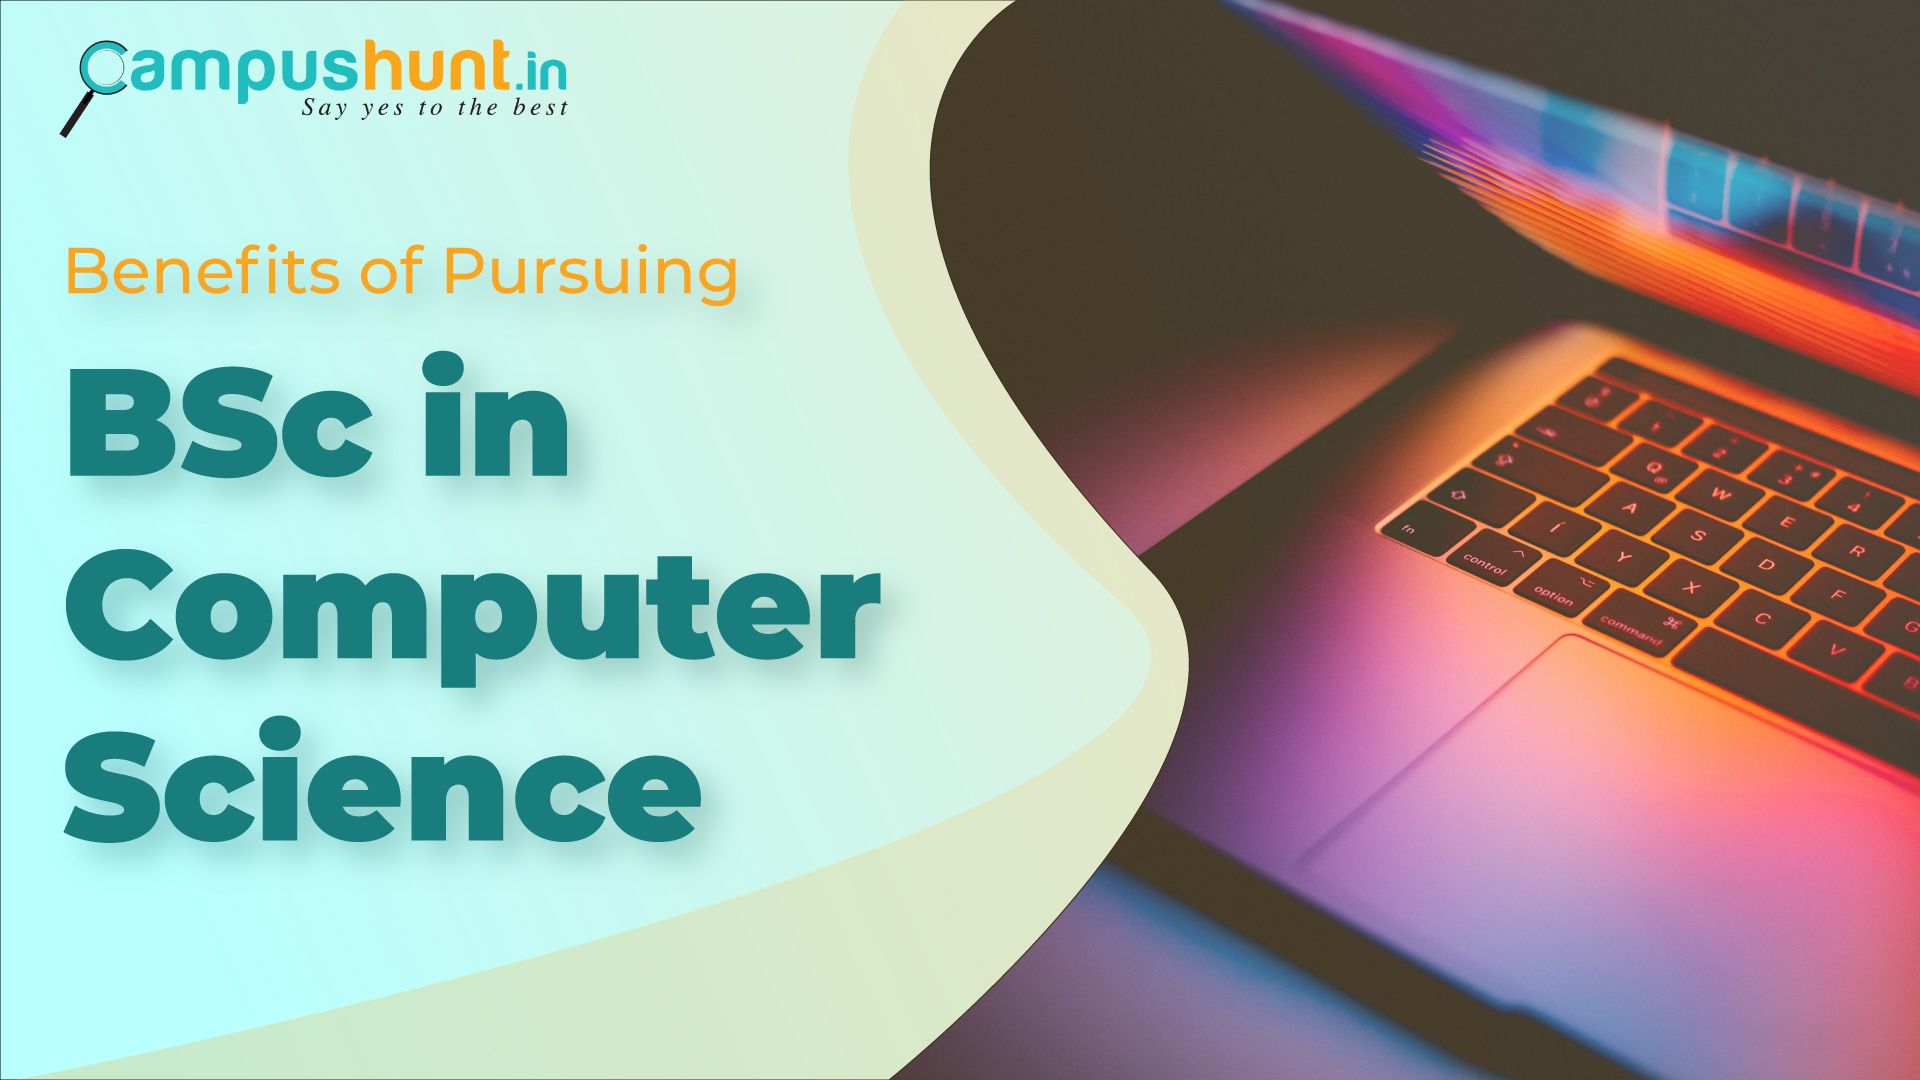 Benefits of Pursuing BSc in Computer Science